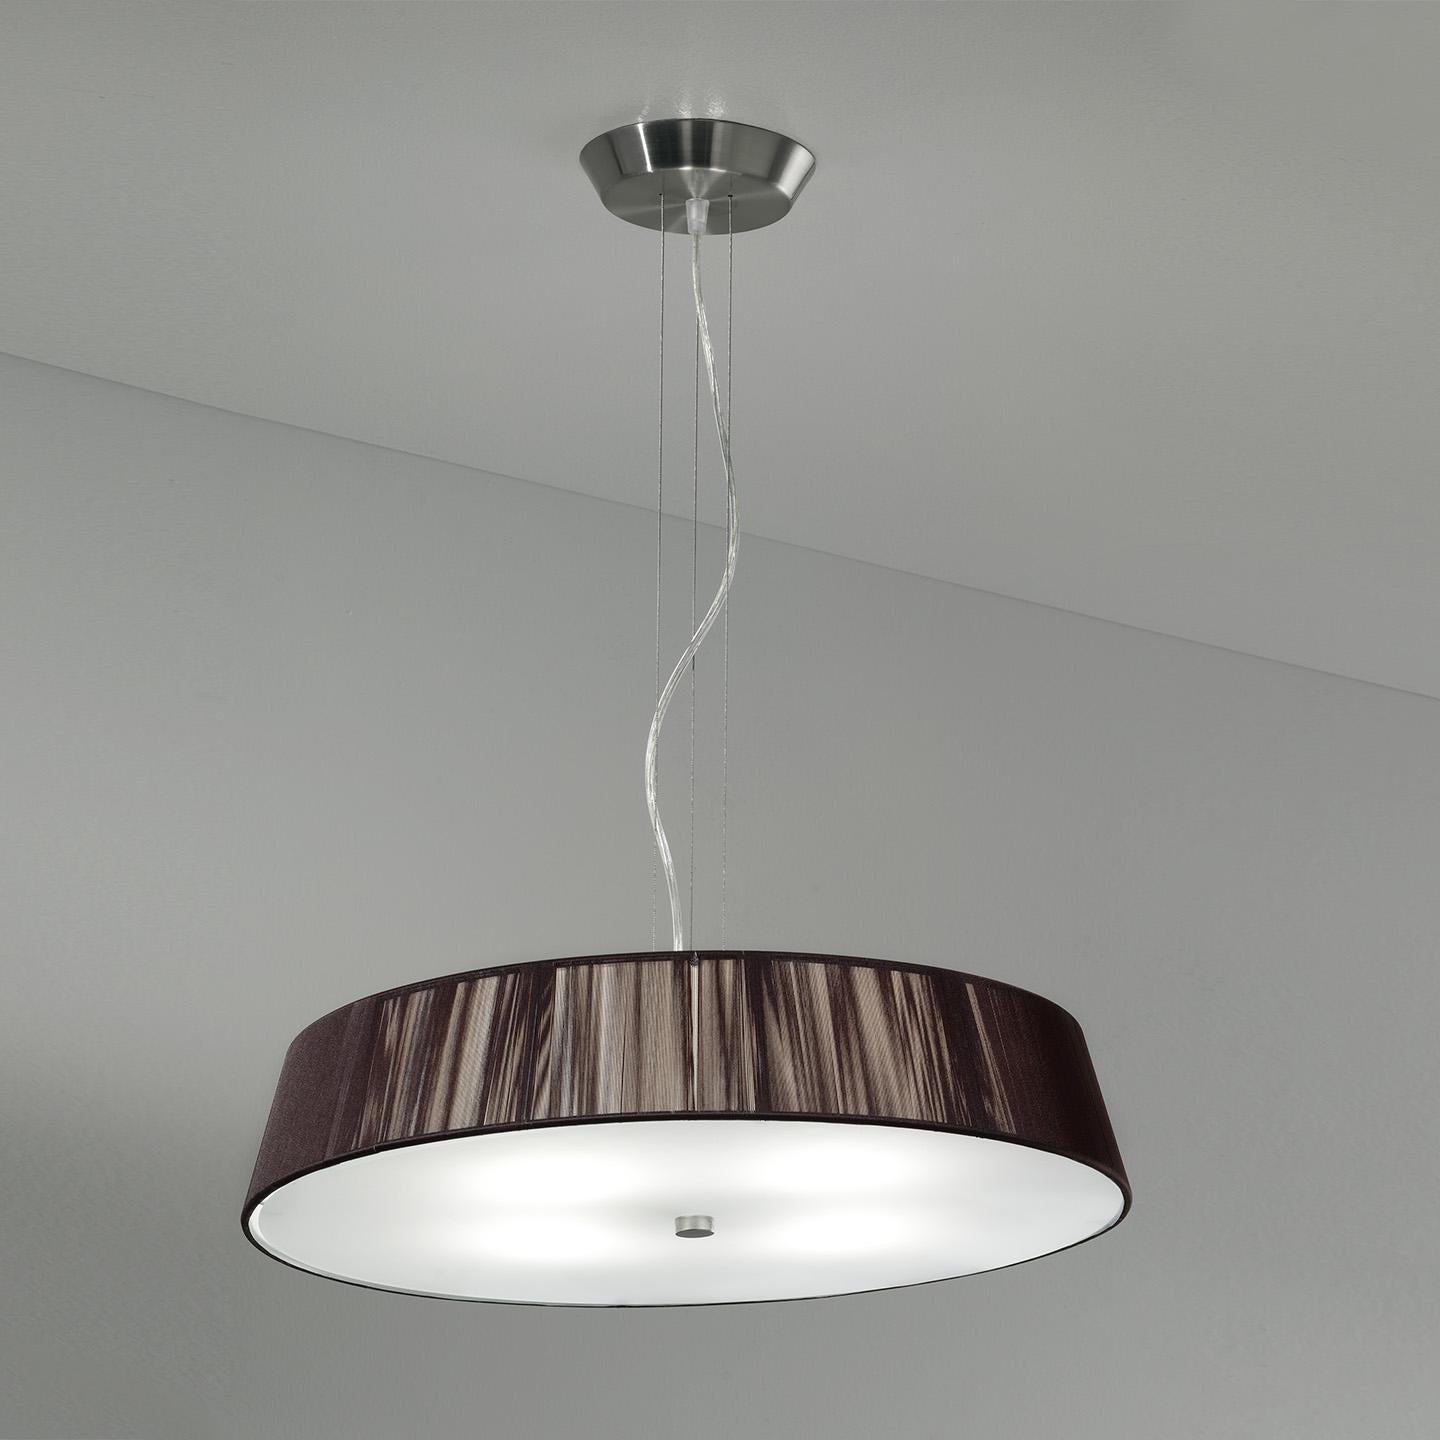 The Lilith Pendant is an elegant lighting solution with a stunning light effect created by threading thin string in a consistent pattern across the shade. As you engage it from different viewpoints, the light pattern shimmers and changes. The result